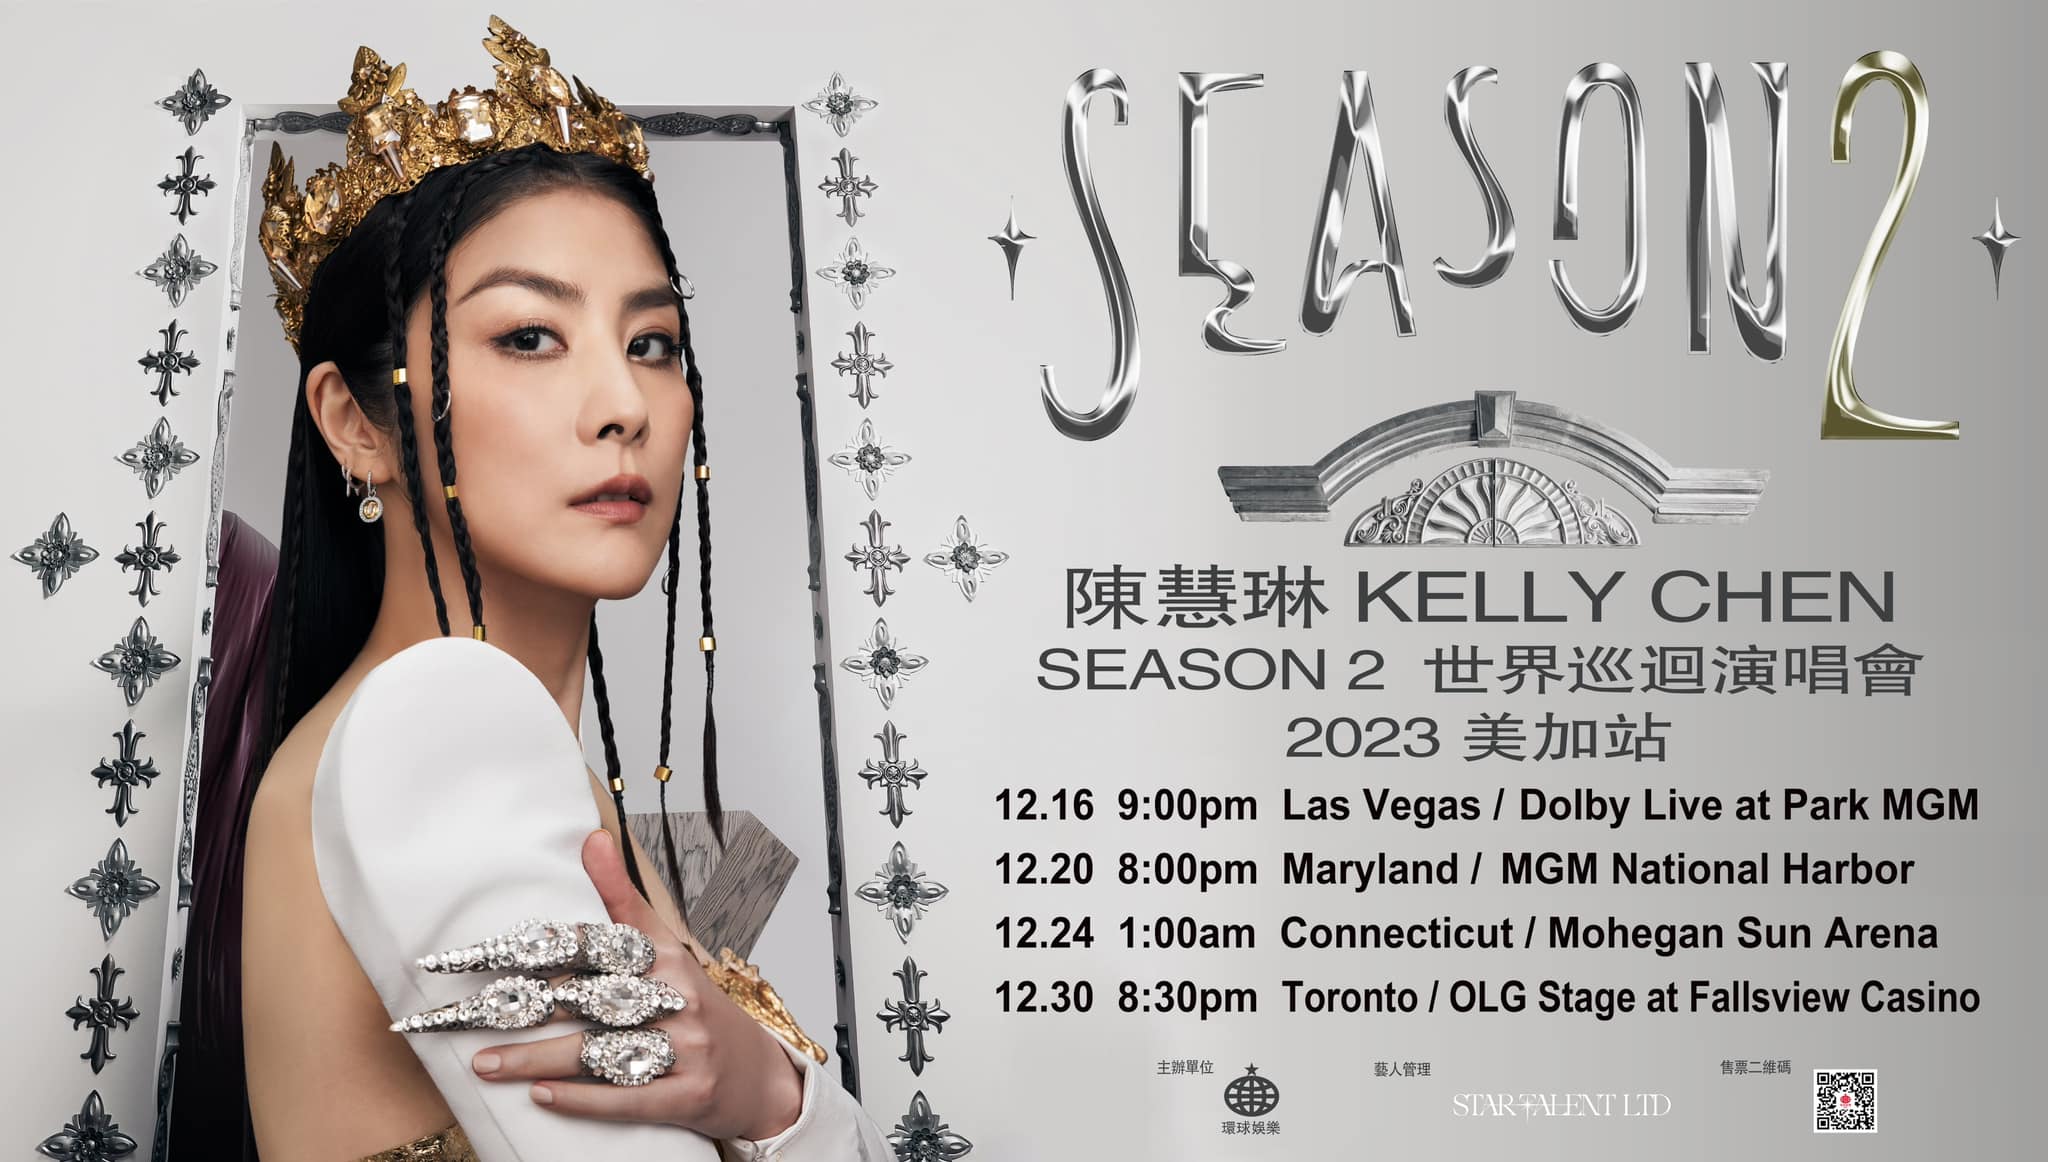 Kelly Chen’s “Season 2” Concert Coming to OLG Stage, Fallsview Casino